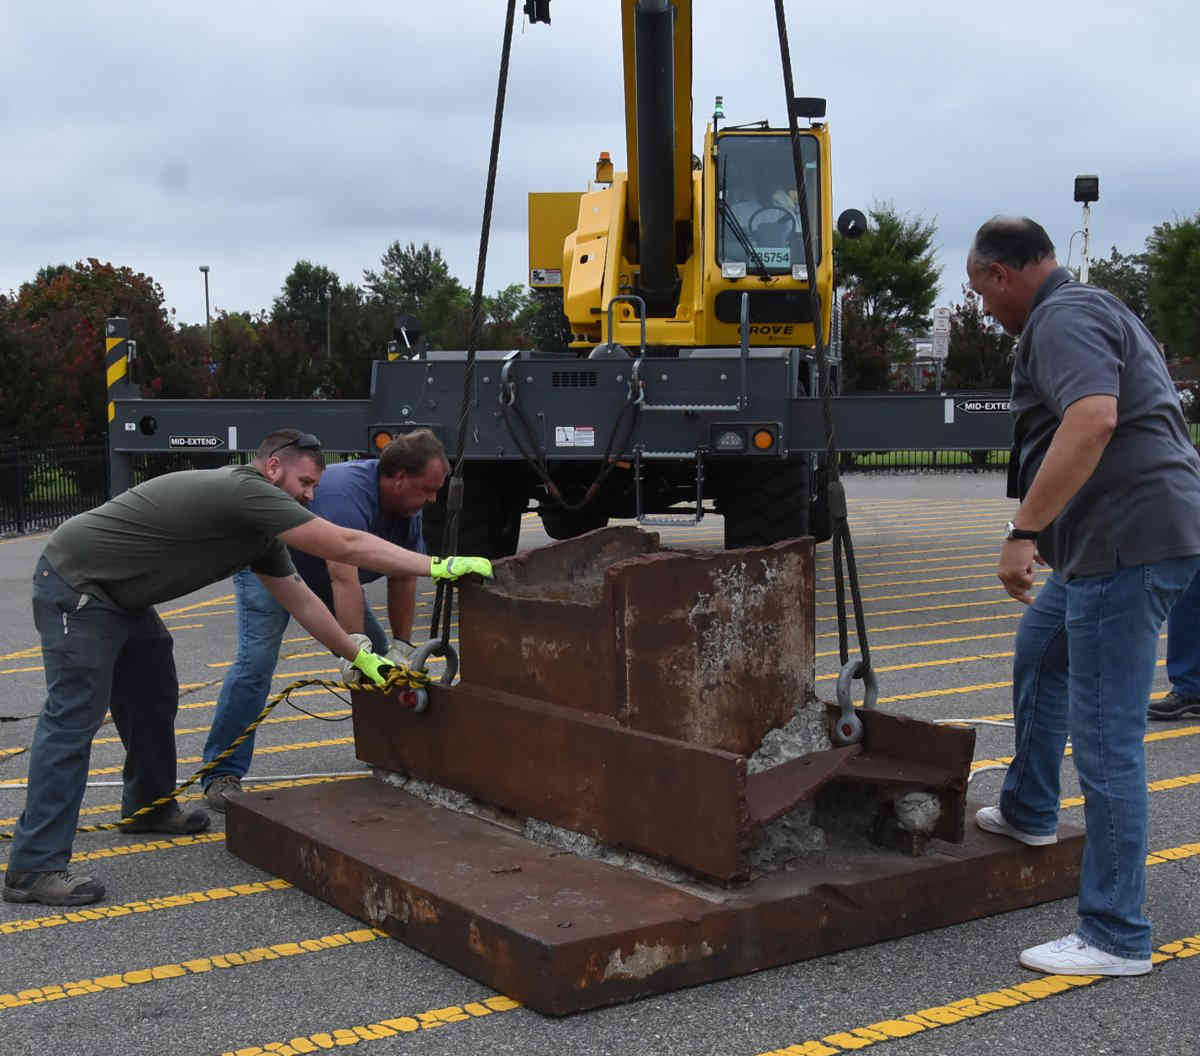 911 steel placed at JFK Airport